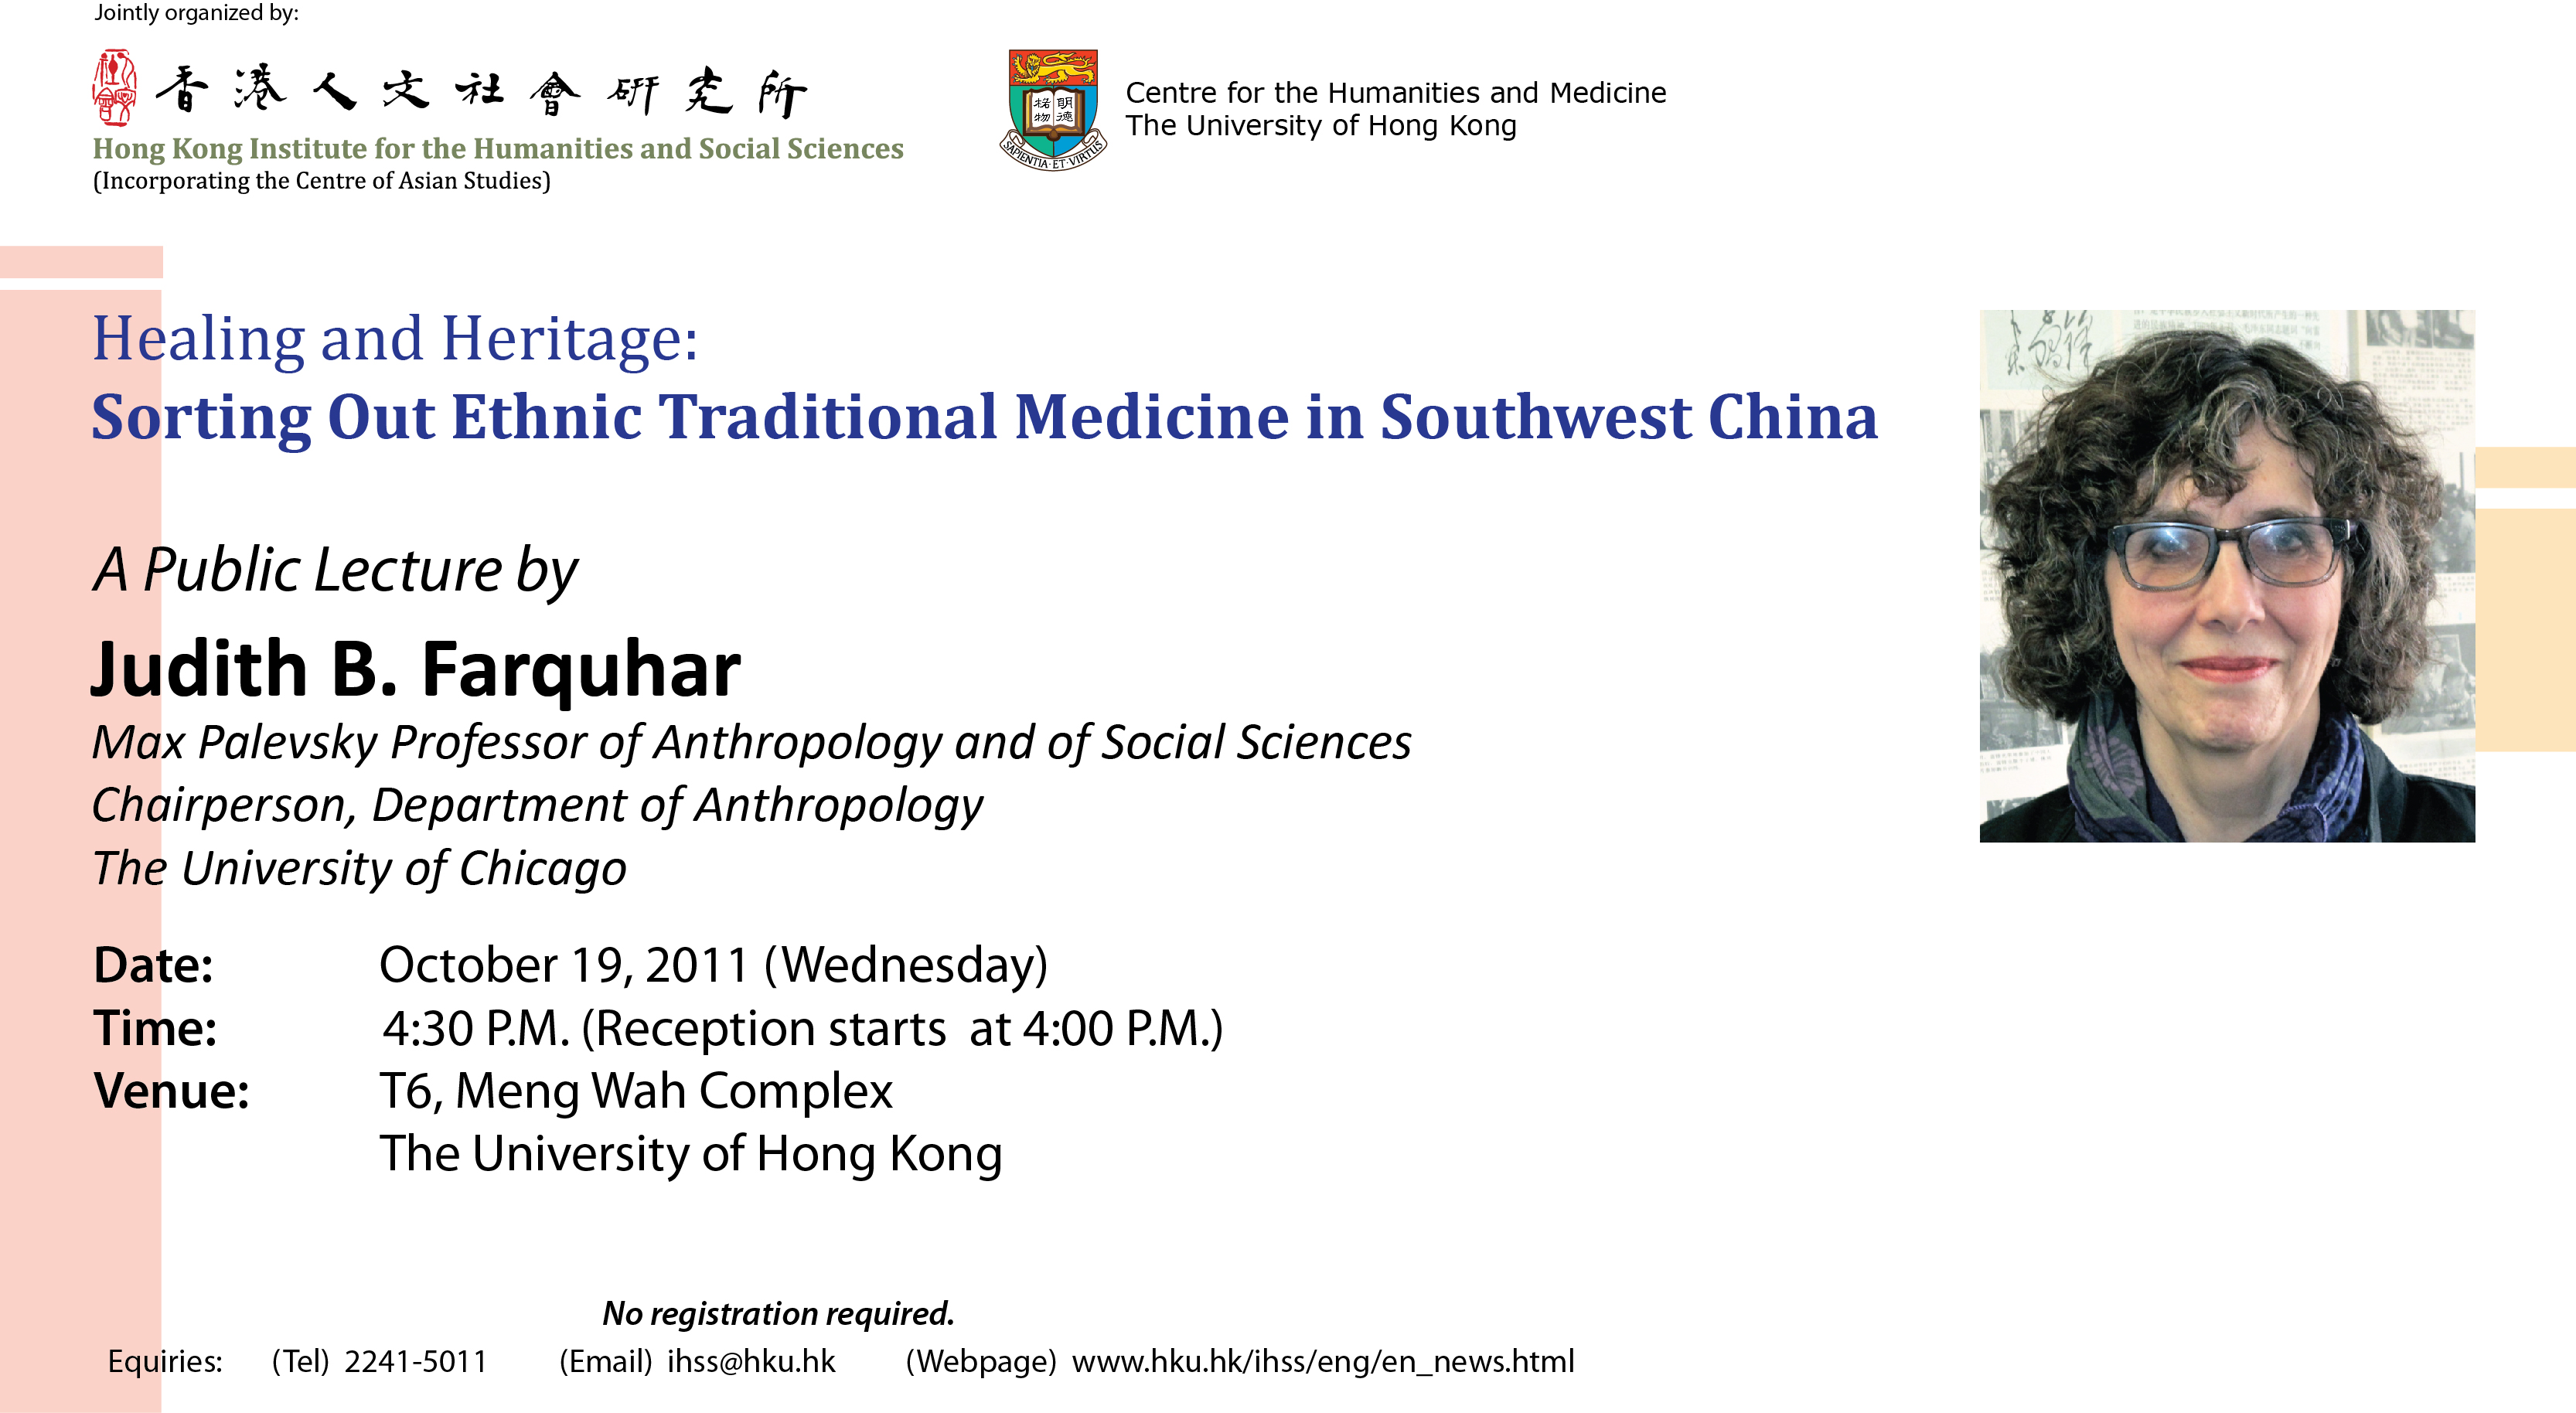 Healing and Heritage: Sorting Out Ethnic Traditional Medicine in Southwest China